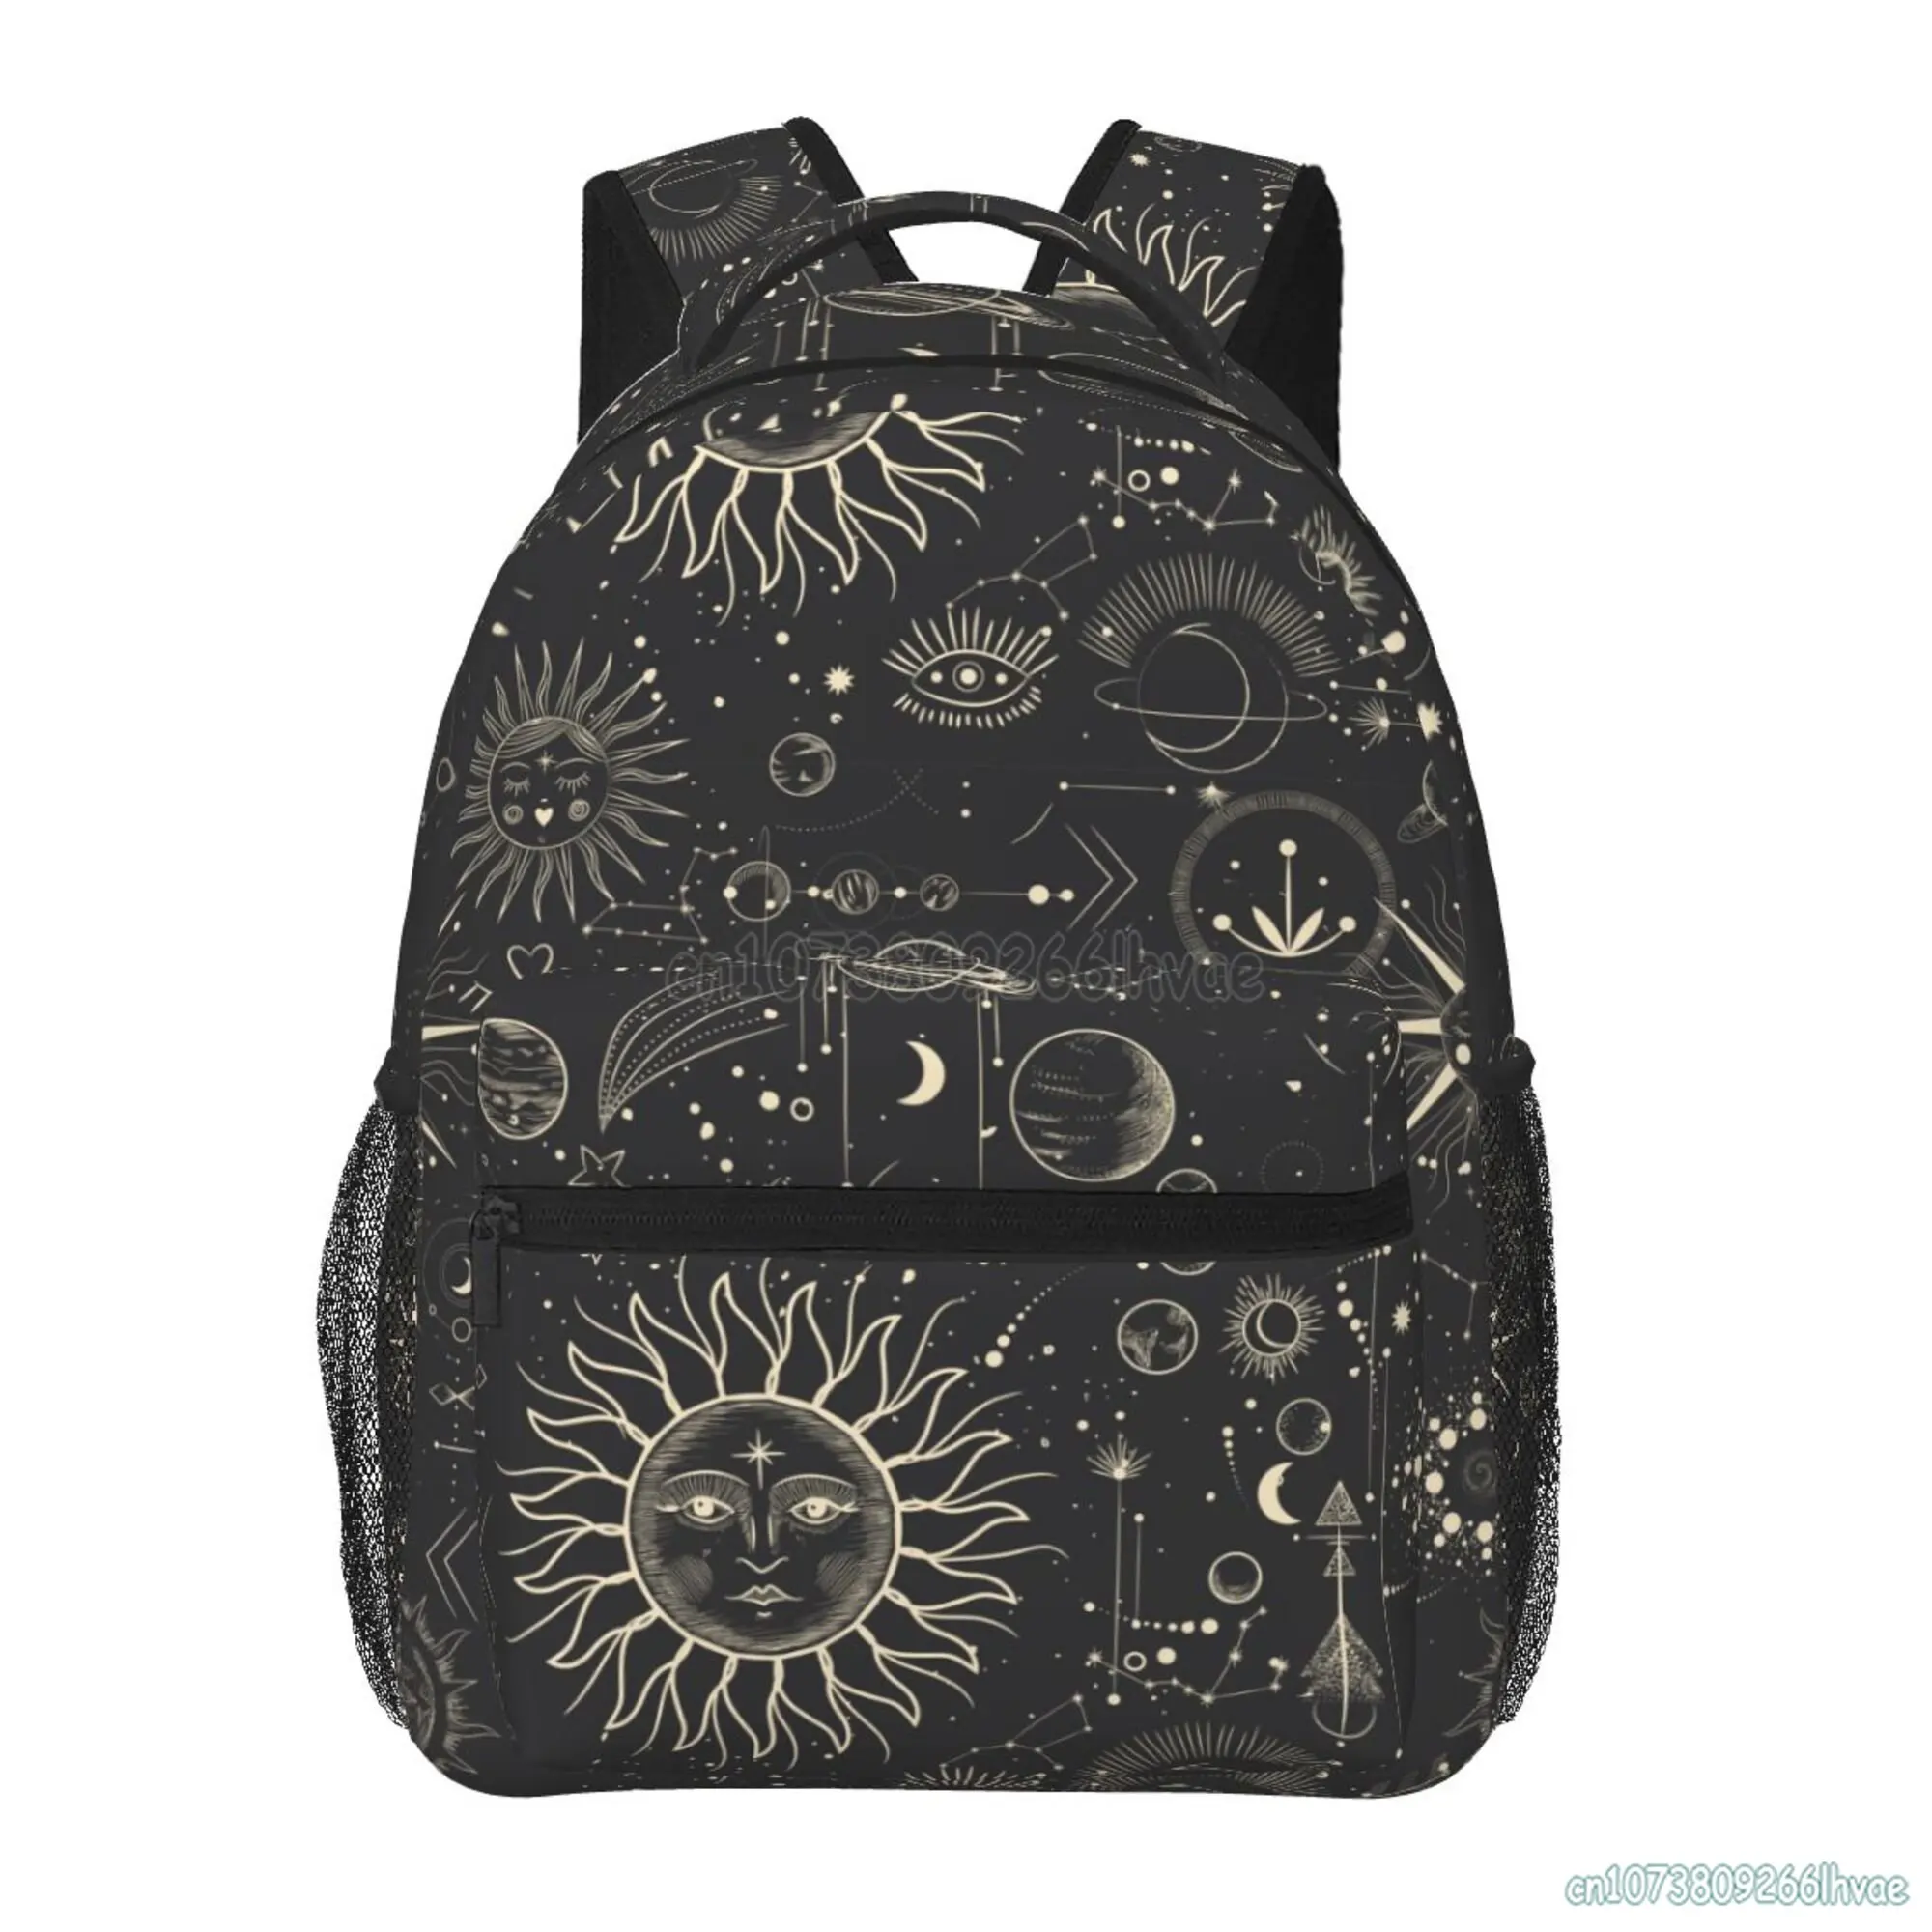 Celestial Pattern Sun and Moon Mystic Goth Witchy Backpacks Schoolbag Rucksack for Students Unisex Softback Travel Bag